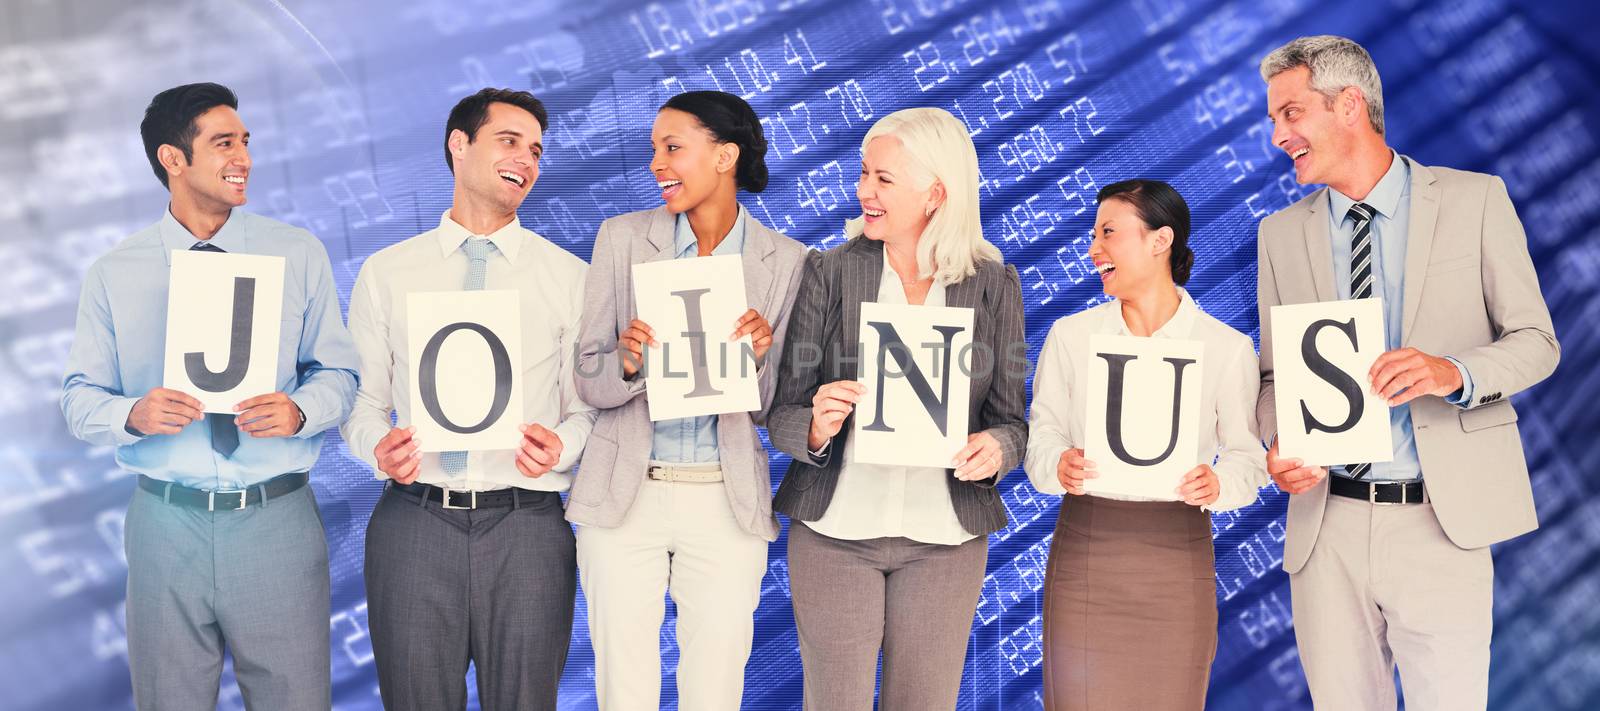 Composite image of business people holding letters sign  by Wavebreakmedia